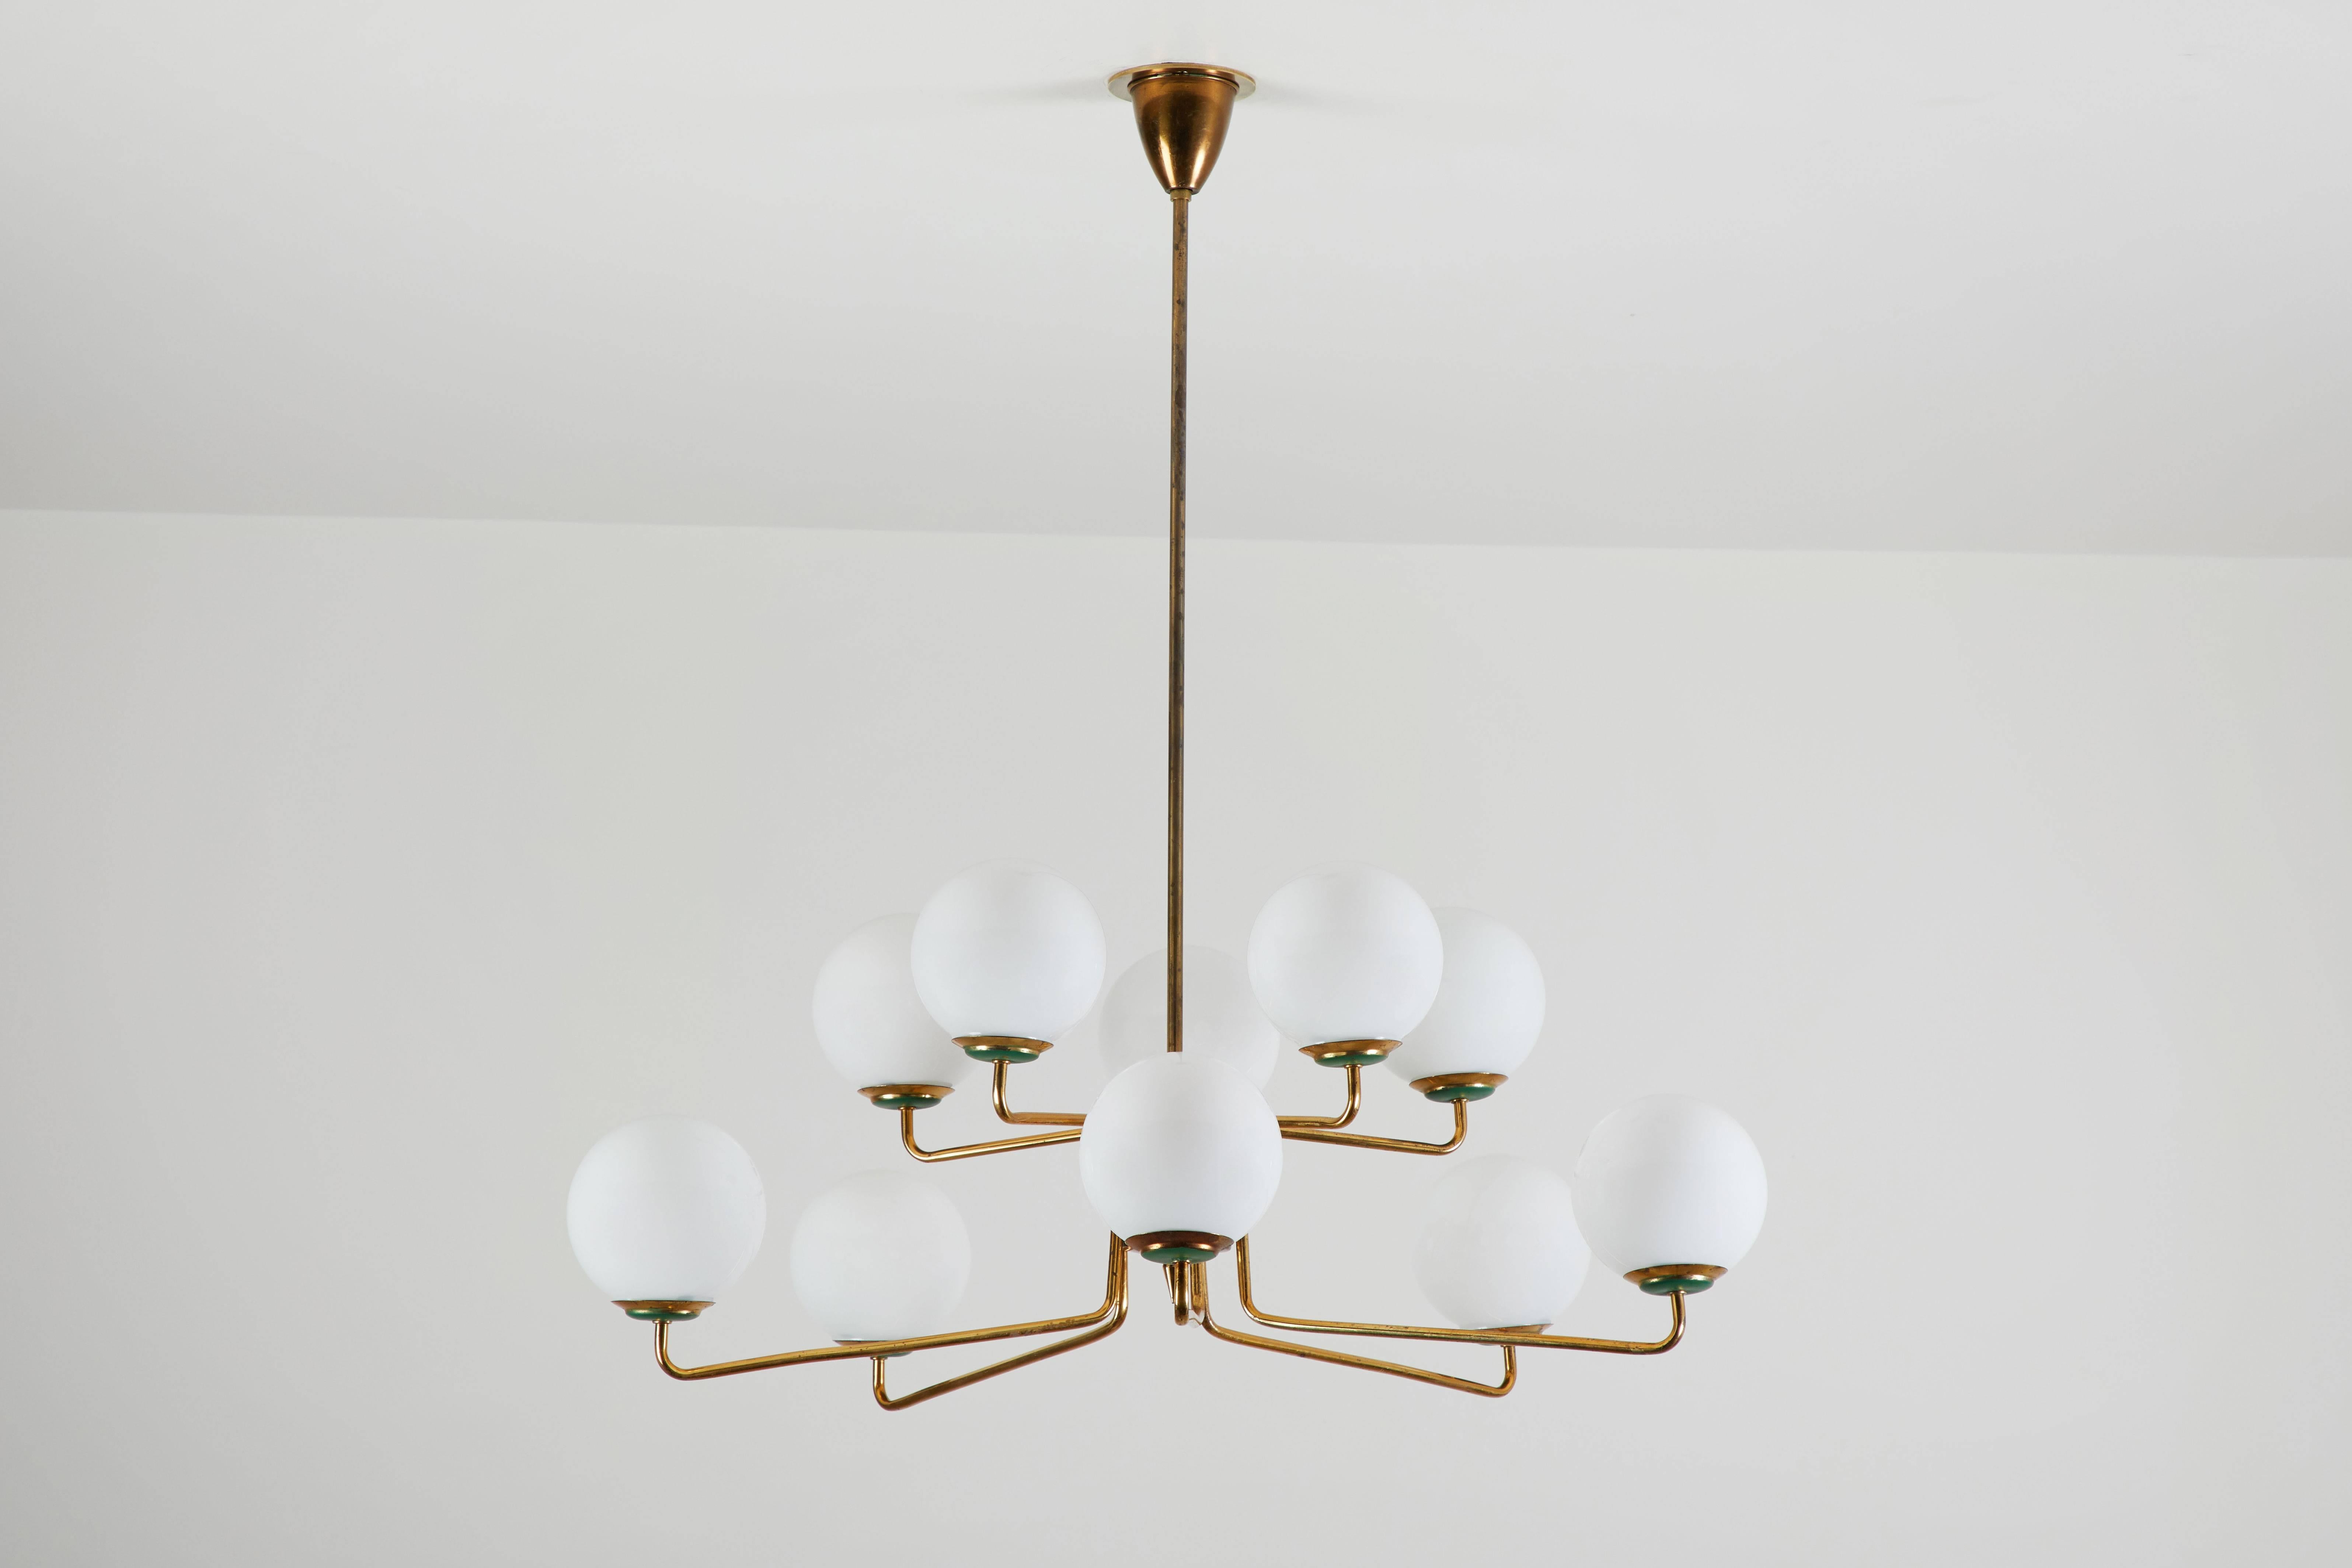 Stilnovo chandelier
Polished brass and opaline glass
Rewired for US junction box ten 25w E-14.